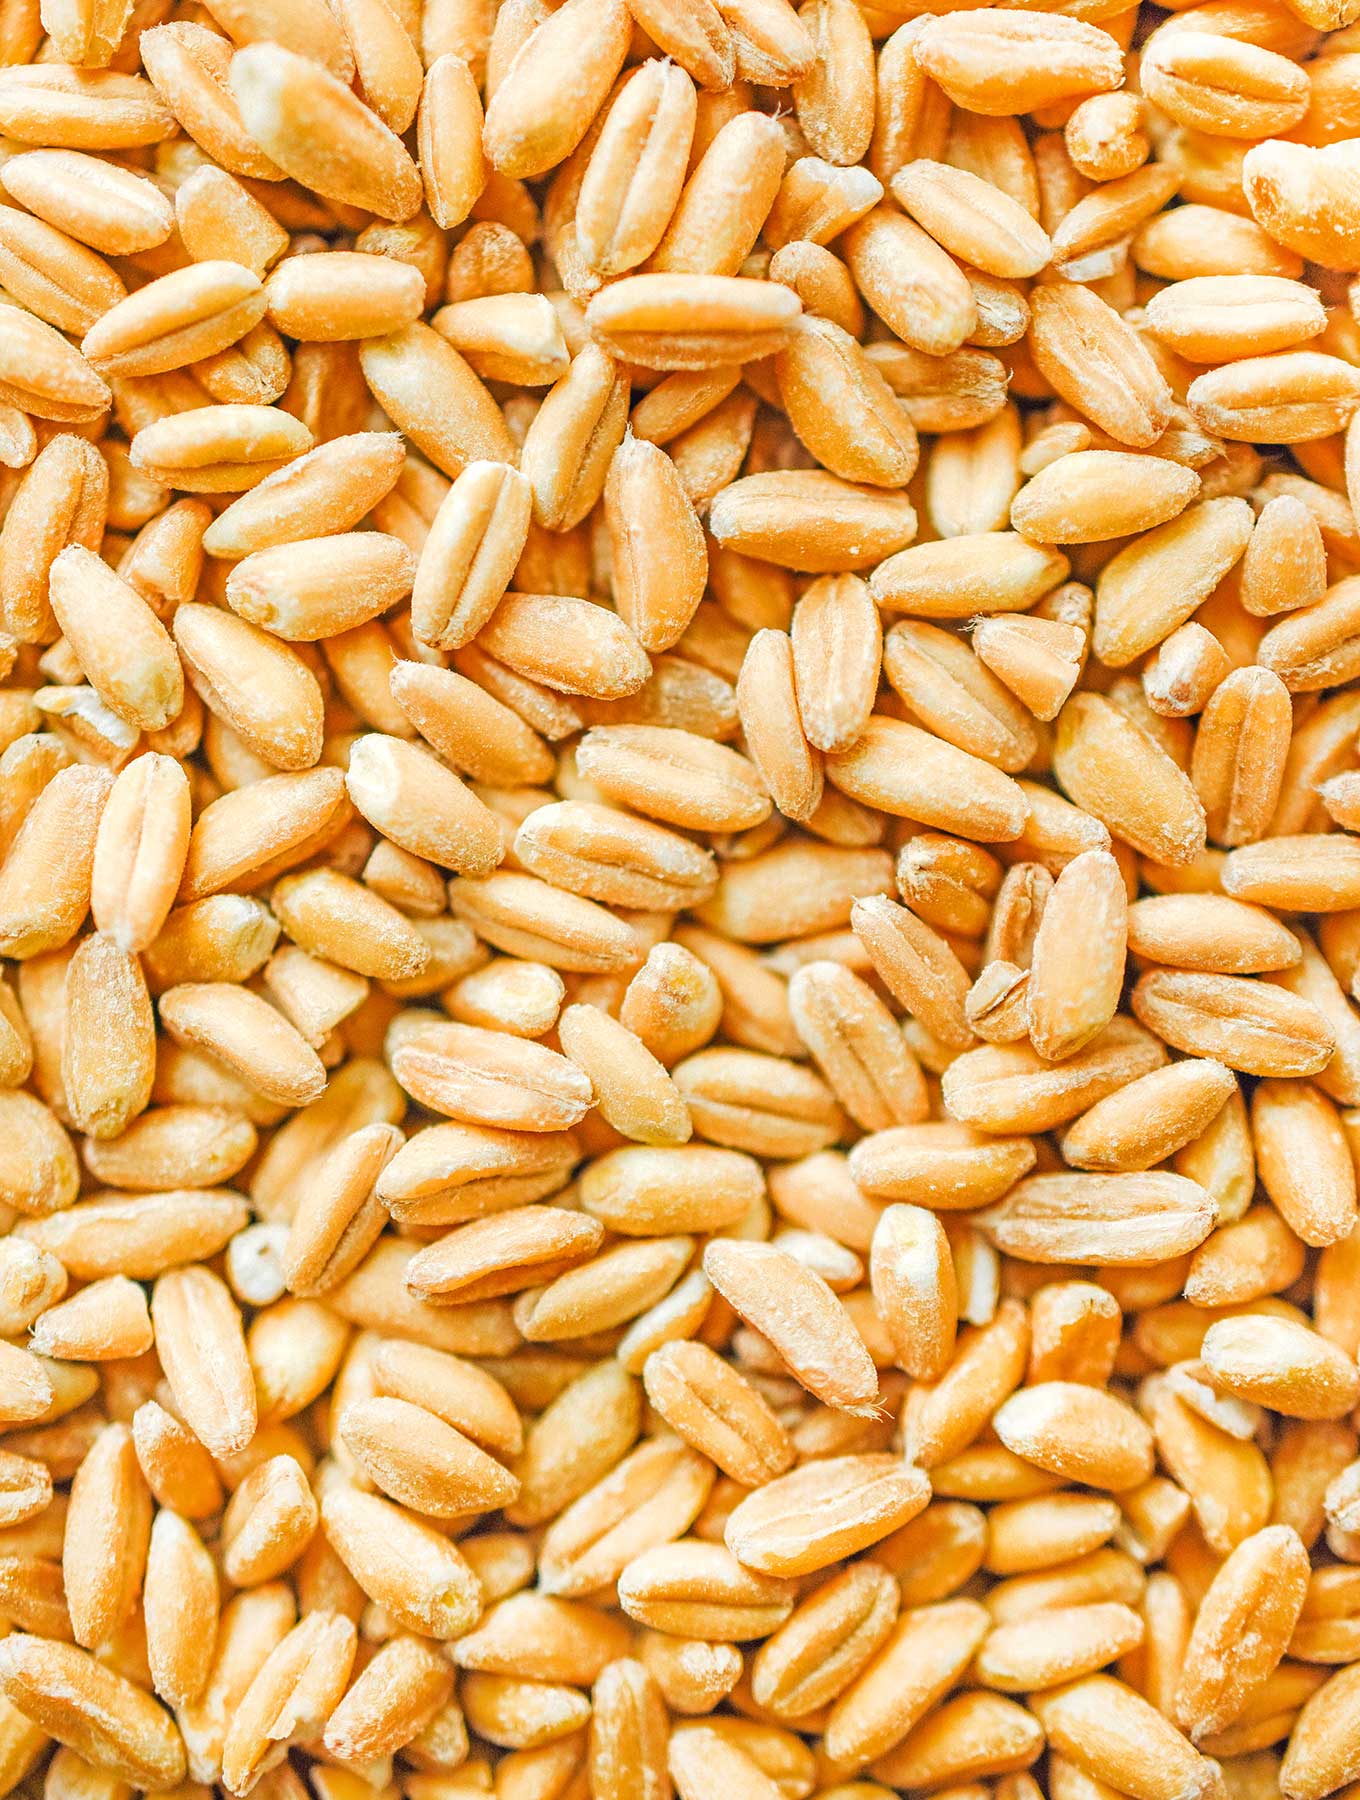 A close-up shot of uncooked farro detailing the texture of the grains